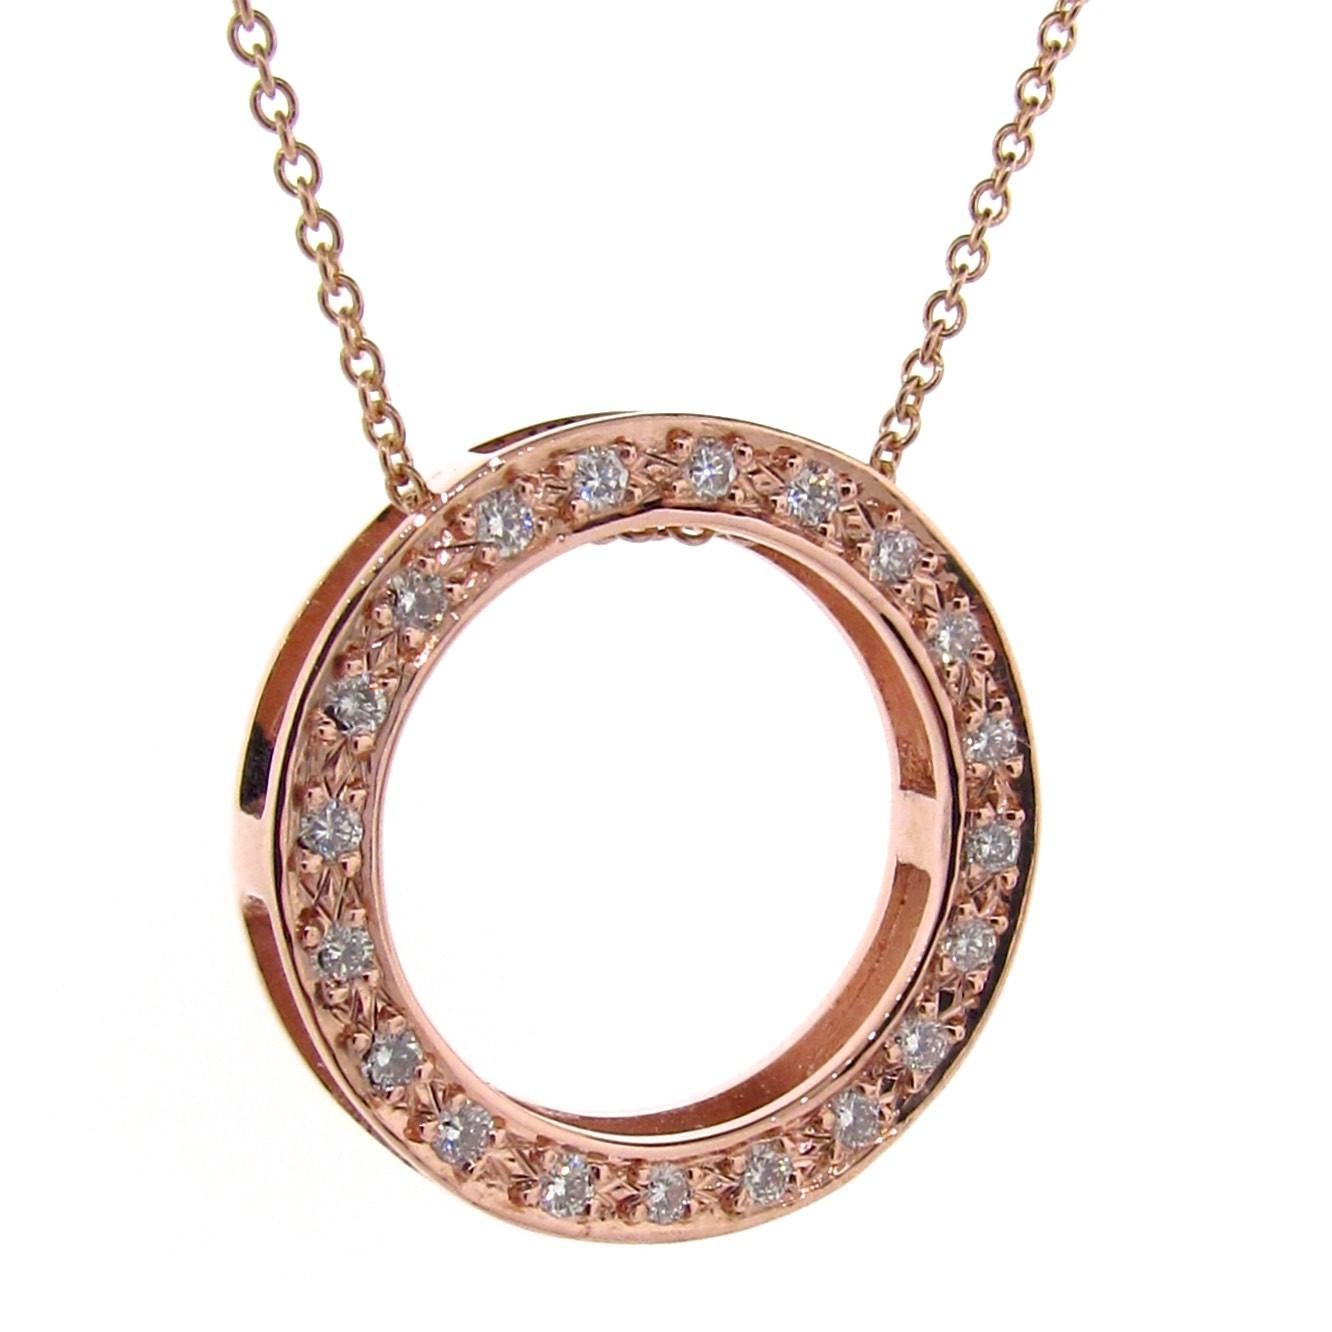 Introducing the Solid 9k Rose Gold White Diamond Eternity Circle of Life Necklace, a versatile and meaningful piece from the Symbolism Collection. This pendant can be worn in two different ways, featuring either the diamond side or the plain gold